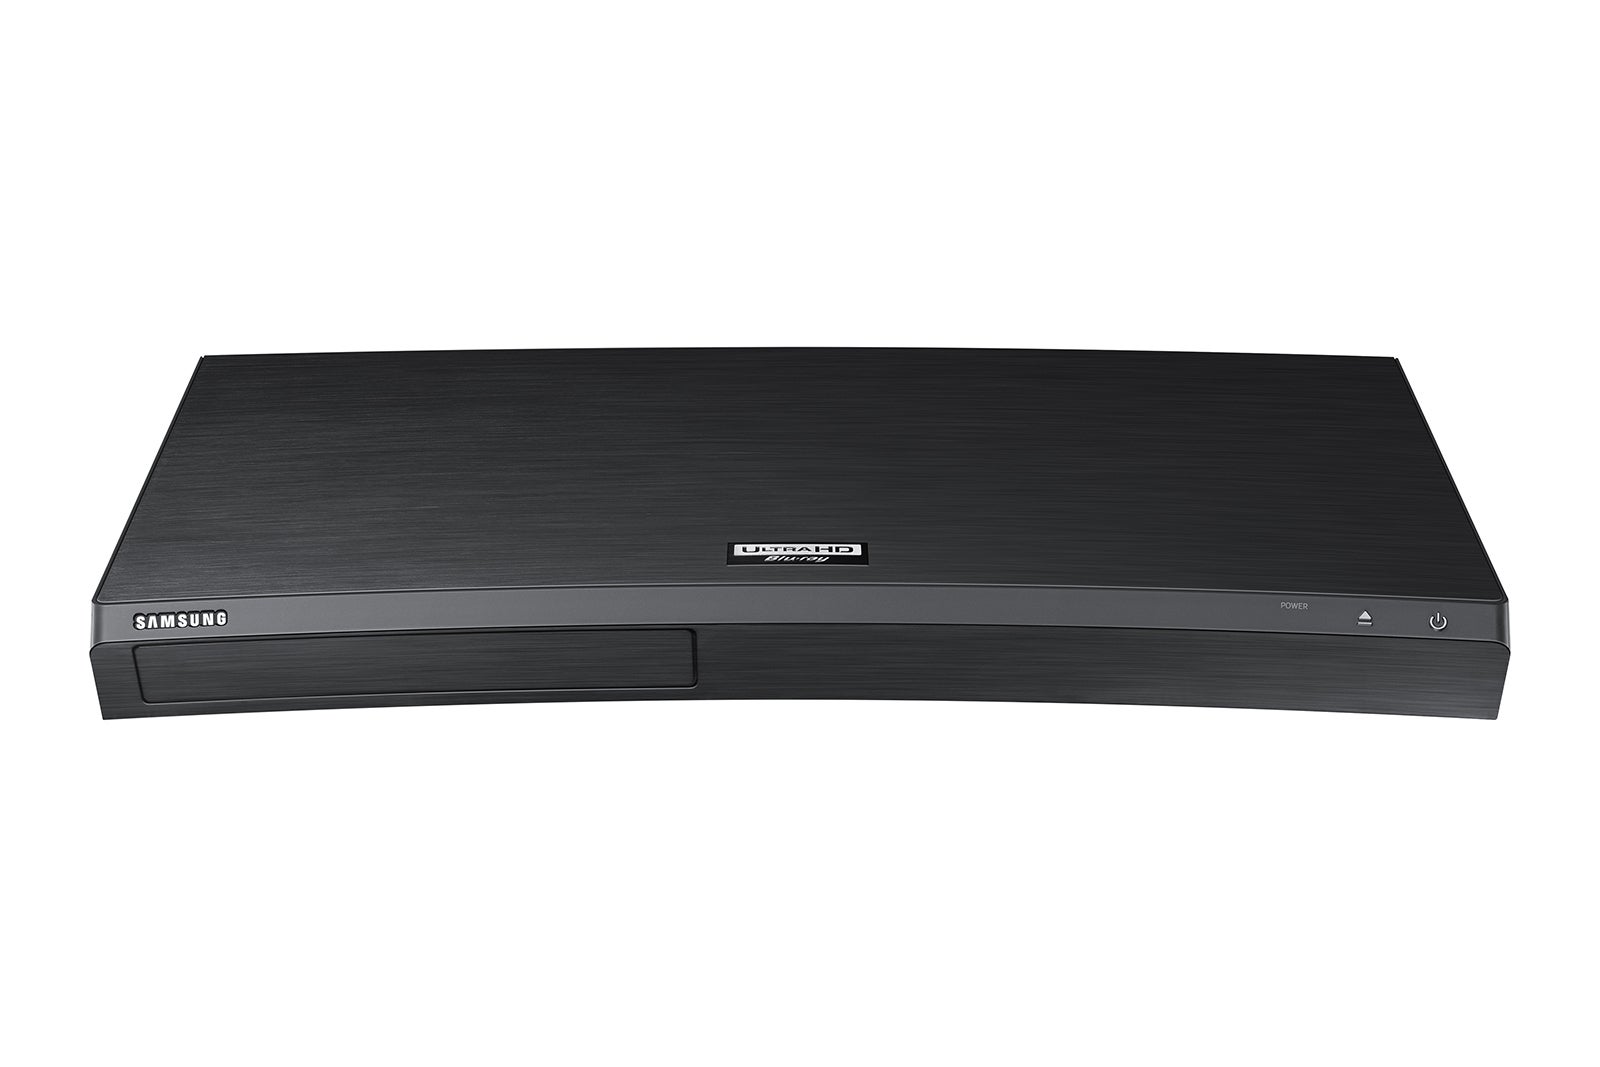 Samsung Ubd M9500 Ultra Hd Blu Ray Player Review Better Color And Integration With Samung S Ecosystem Techhive